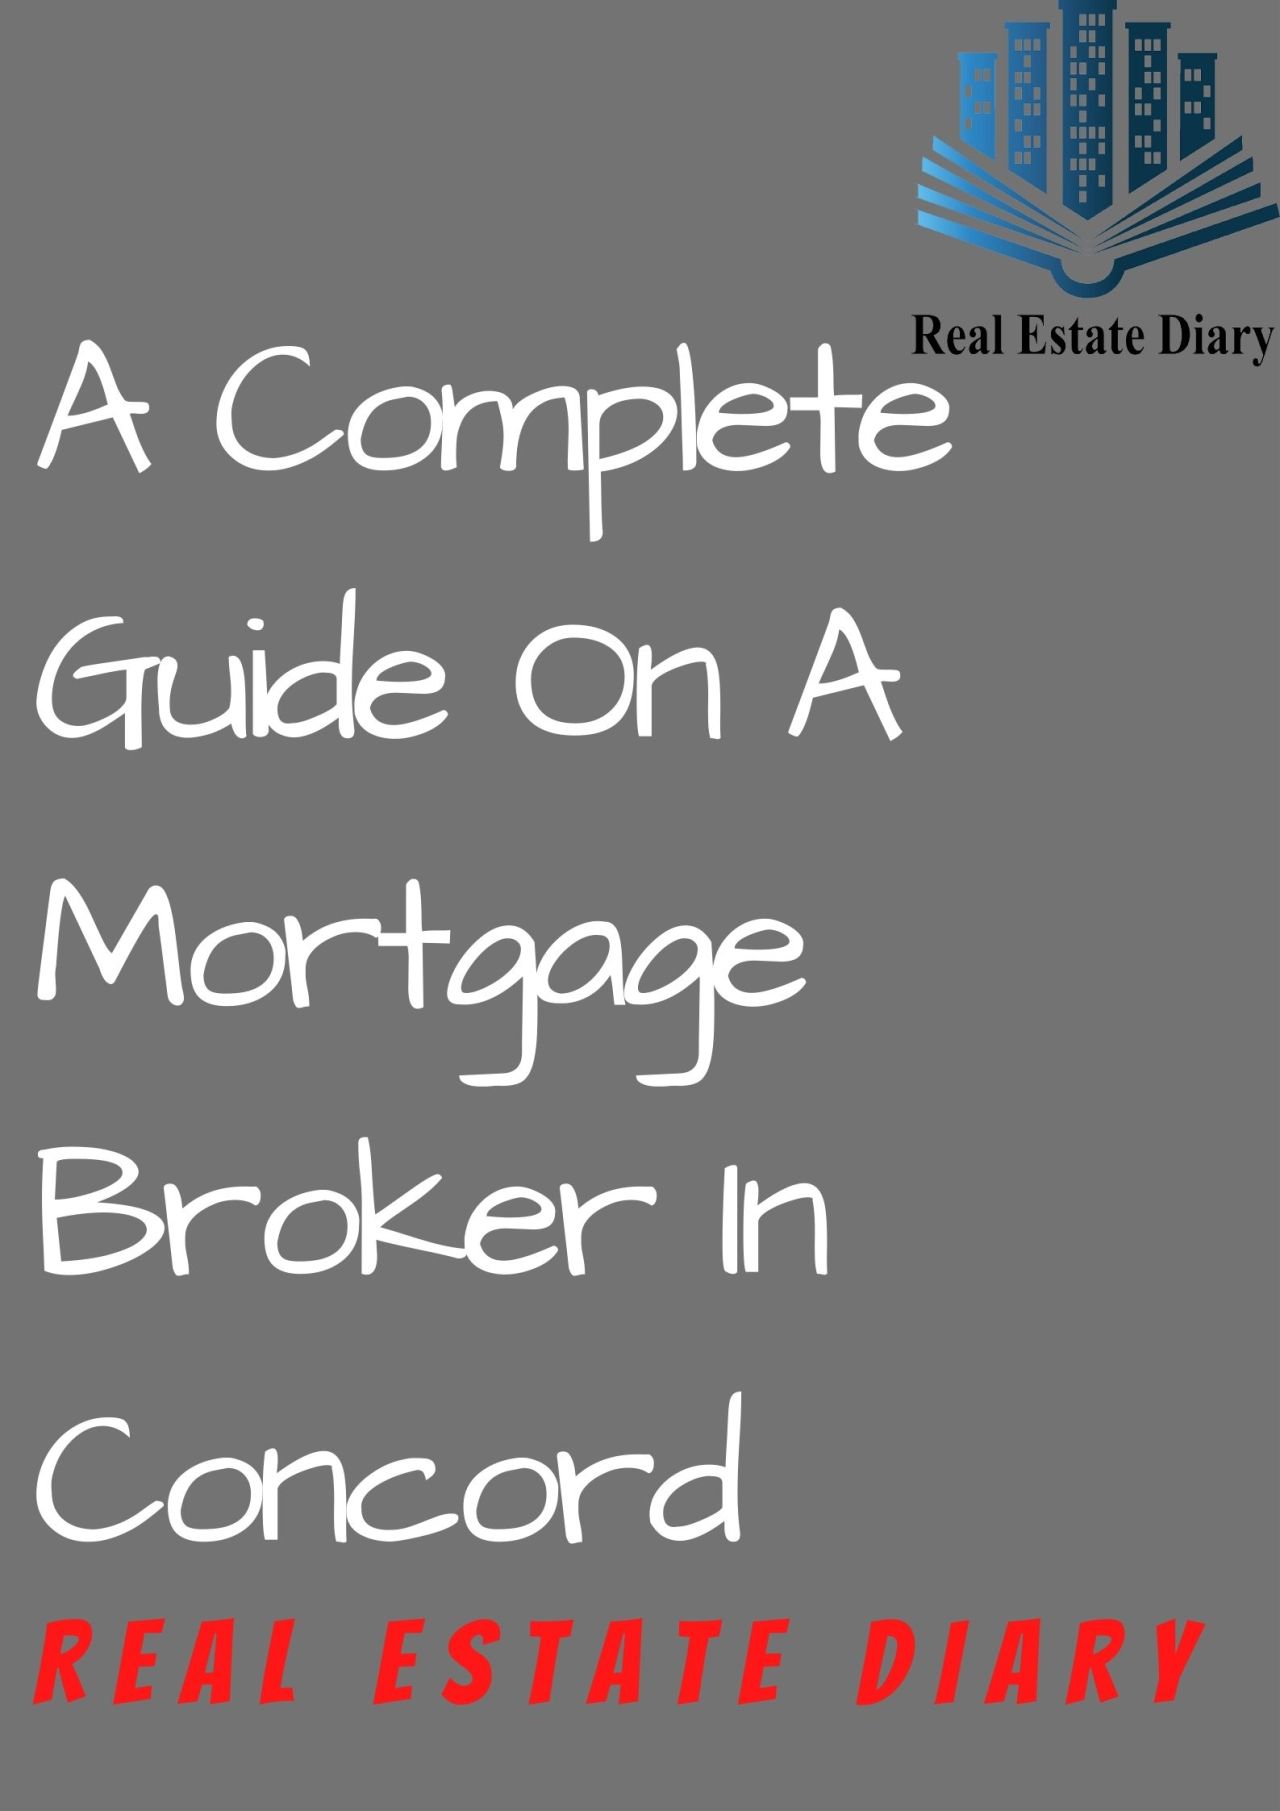 Real Estate Diary — Why To Use A Calculator For Selling a House?